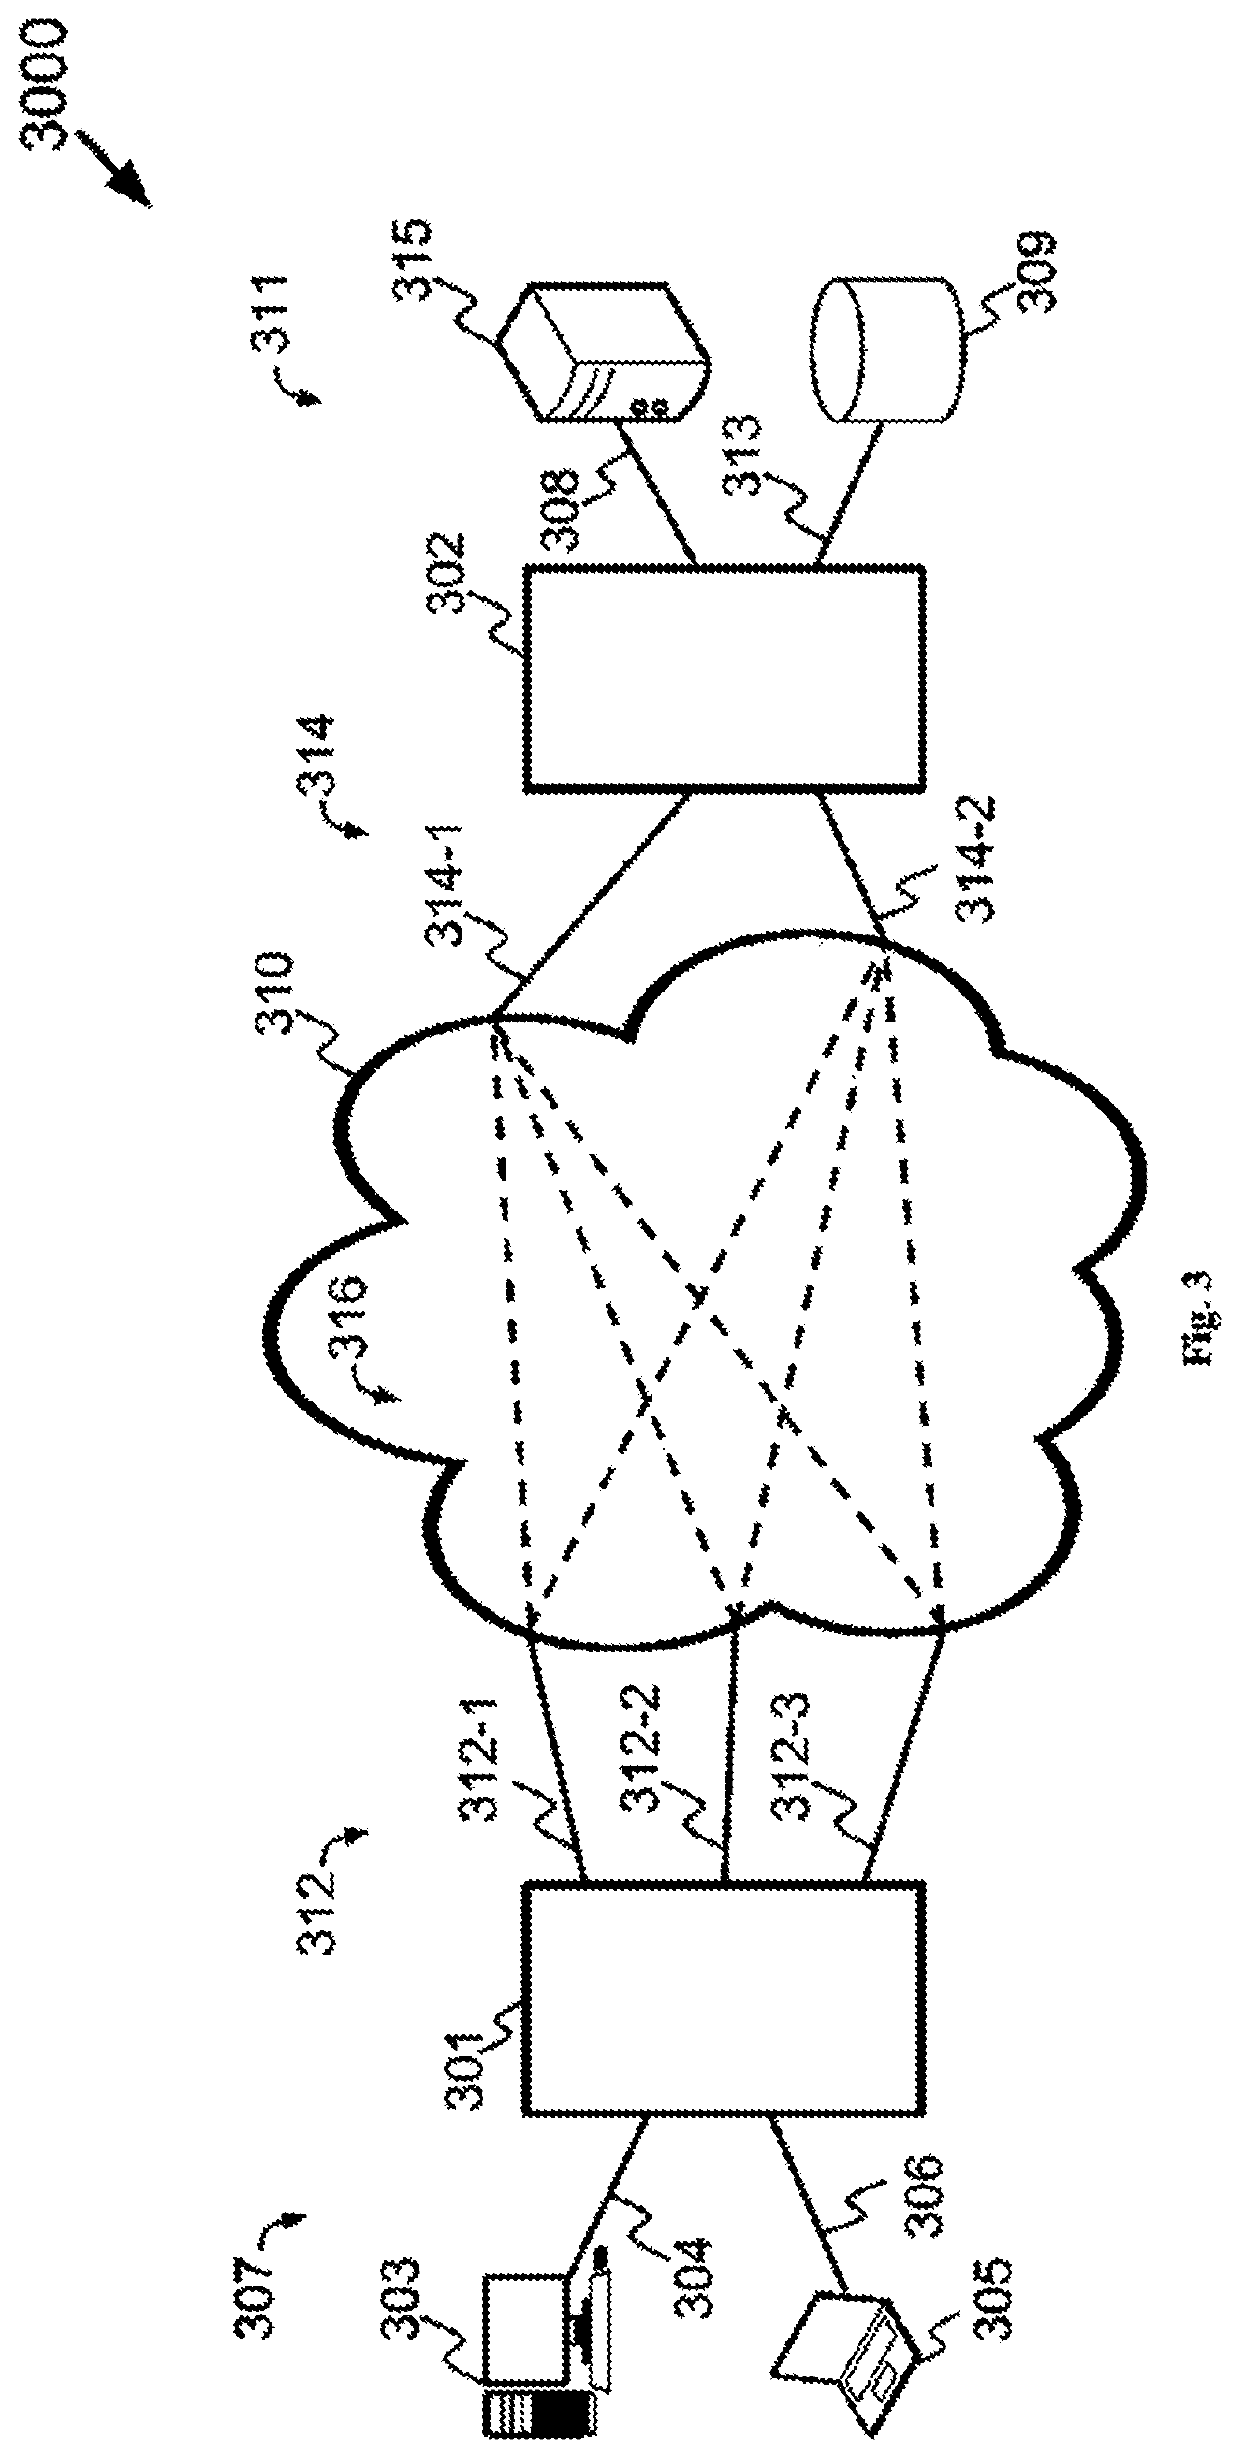 Methods and systems for sending packets through a plurality of tunnels